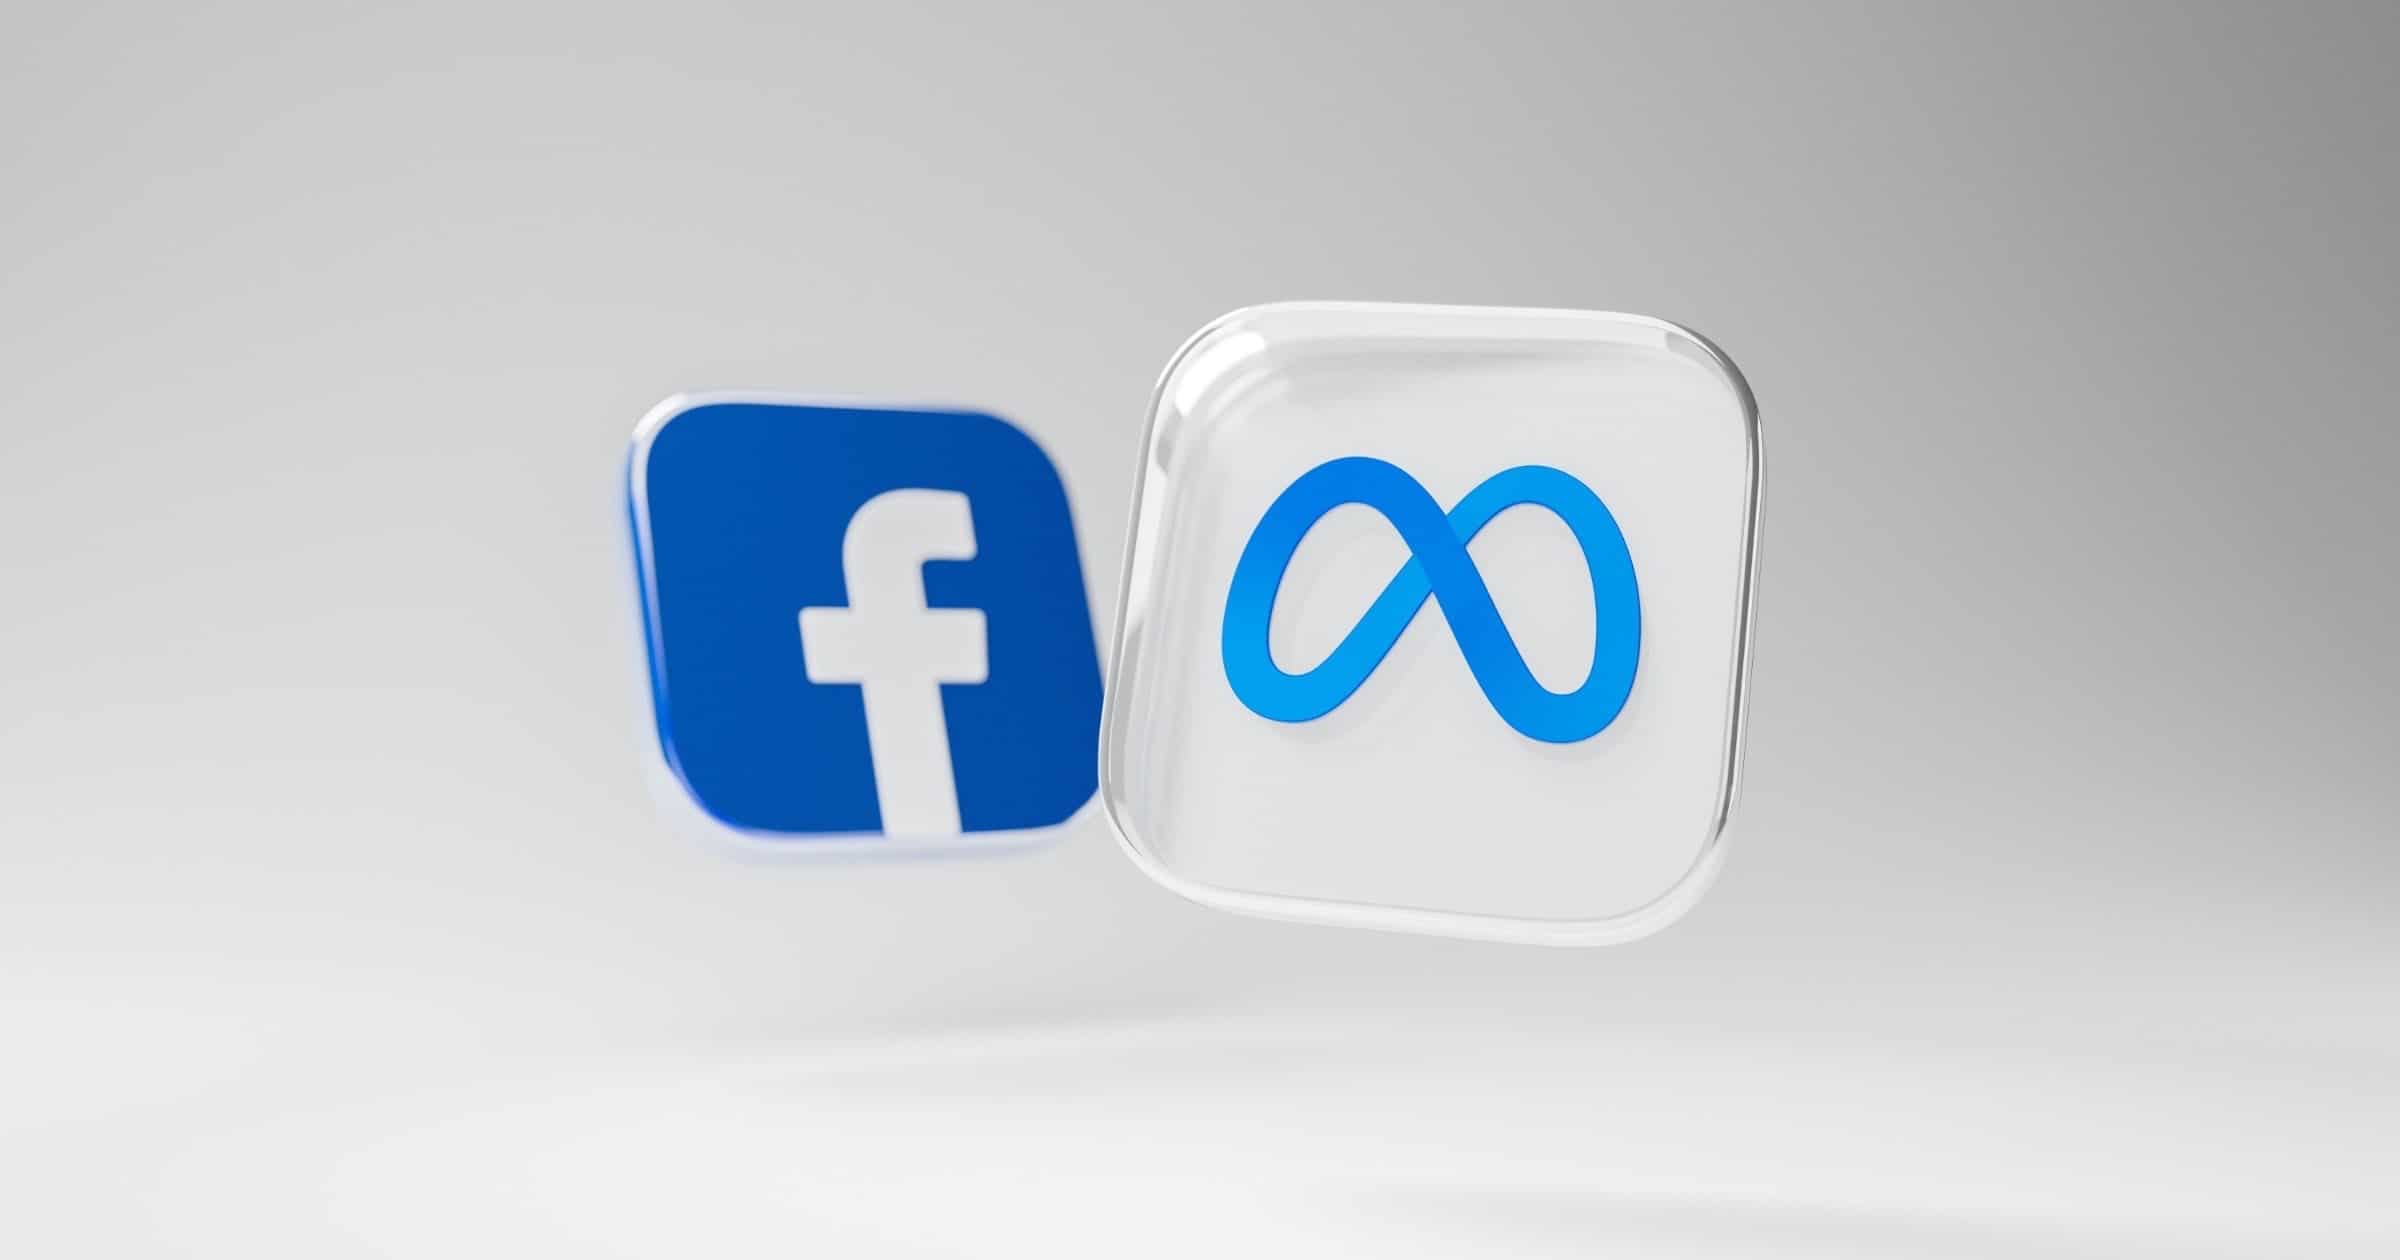 logos for Facebook and Meta. Photo by Dima Solomin on Unsplash